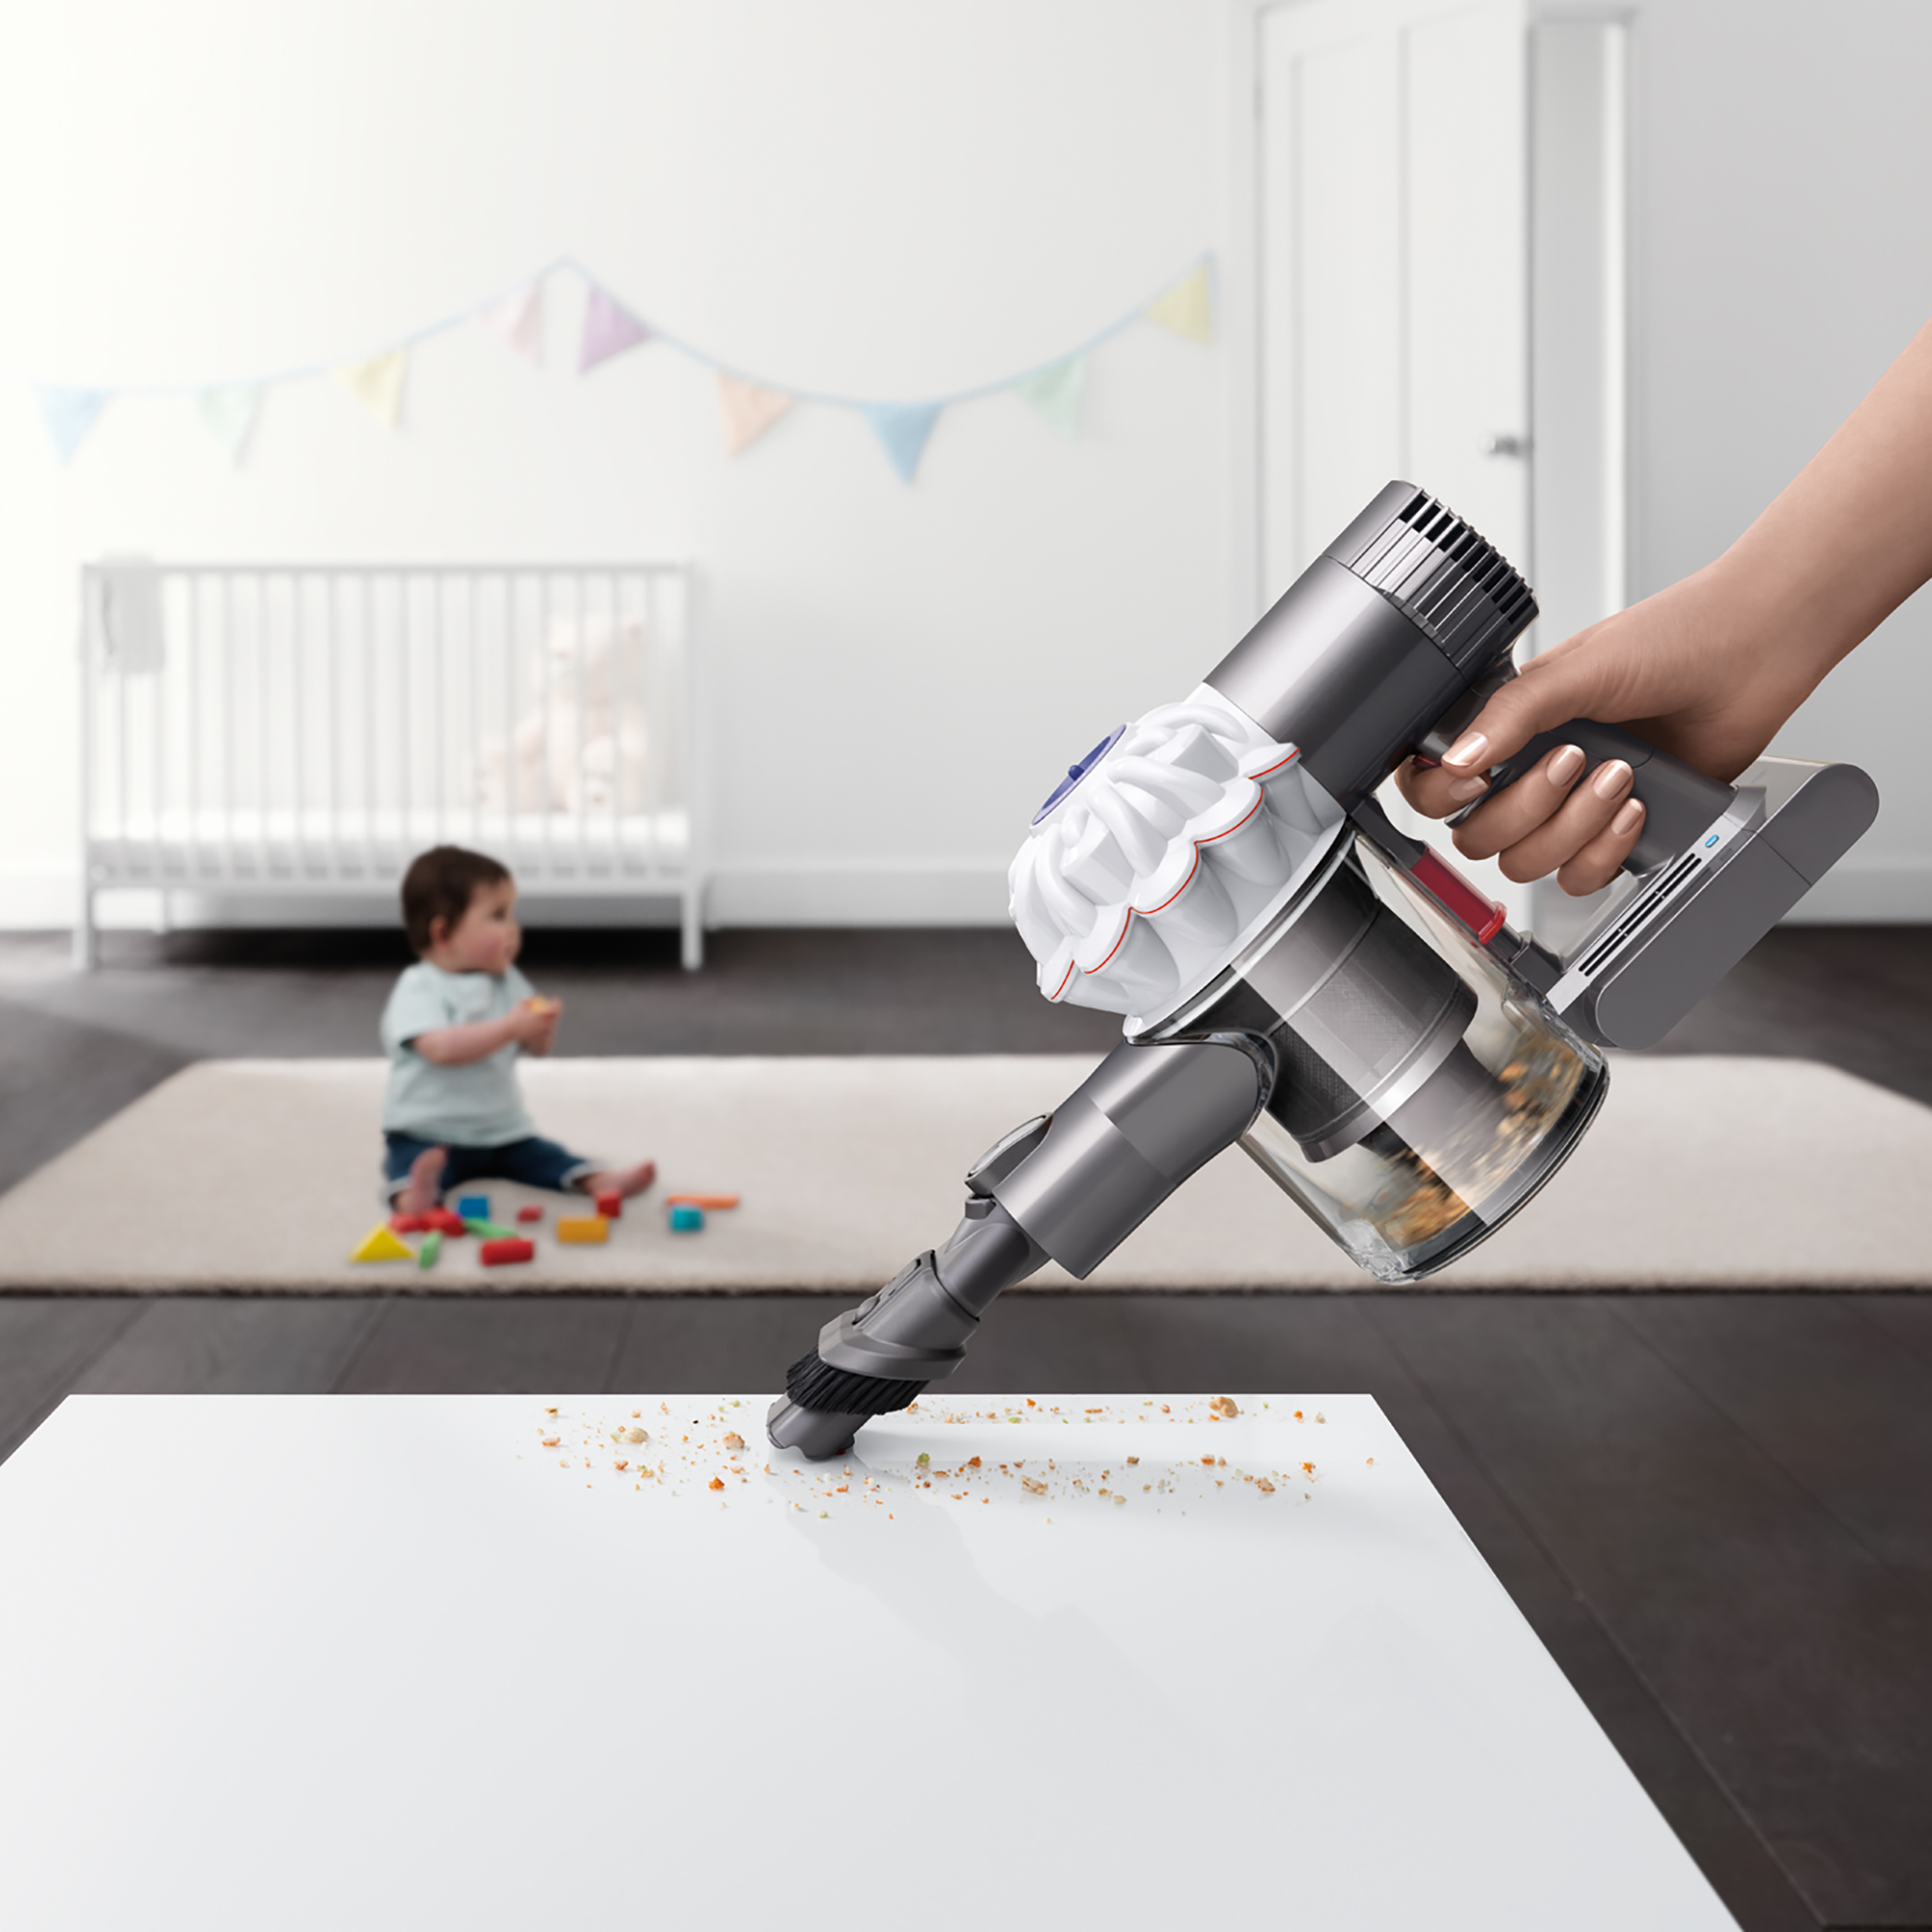 Dyson V6 Trigger Handheld Vacuum with Combination Tools (V6 Trigger Baby + Child) - image 4 of 6